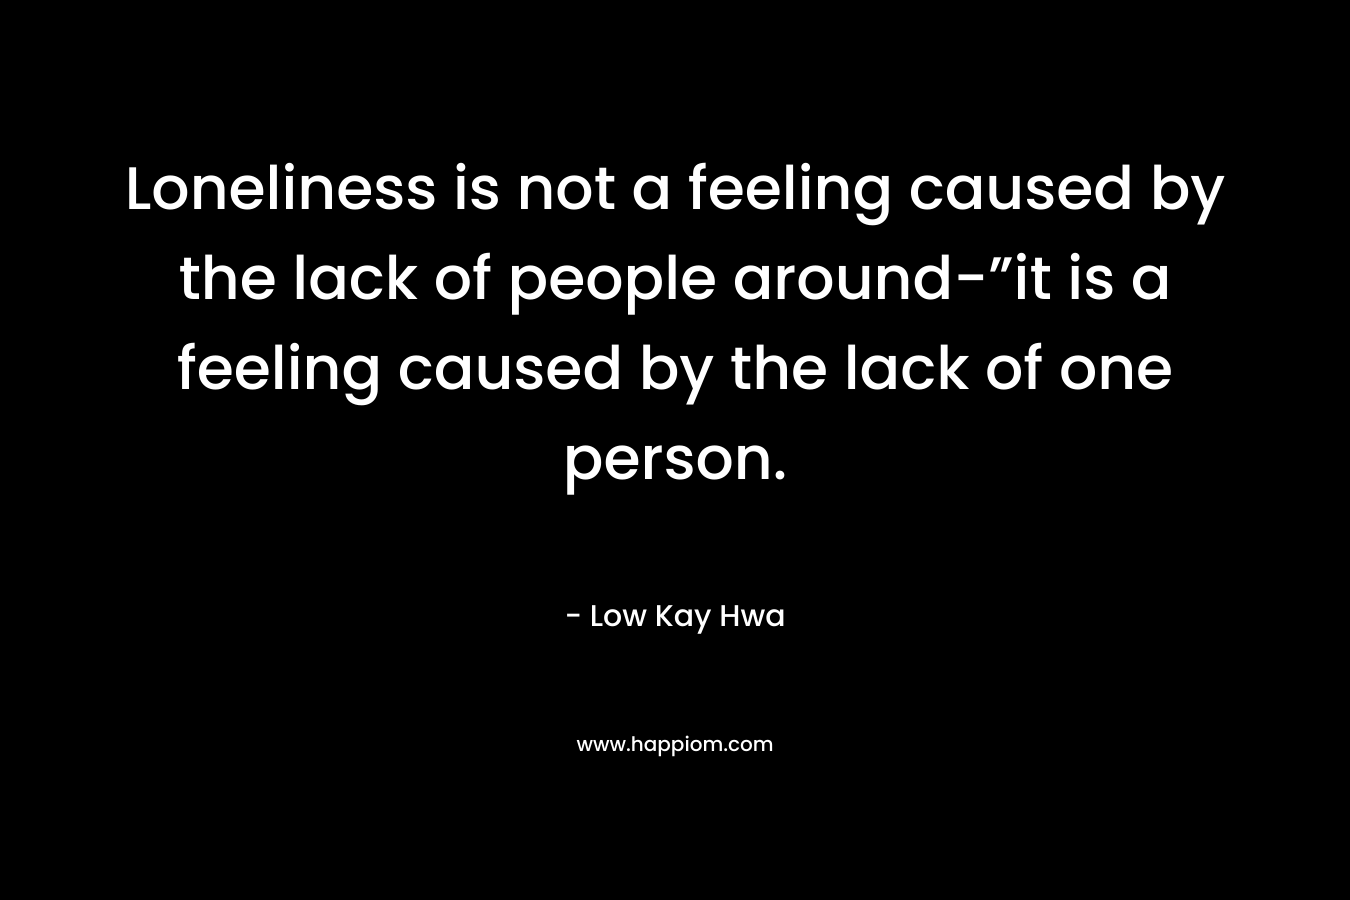 Loneliness is not a feeling caused by the lack of people around-”it is a feeling caused by the lack of one person.